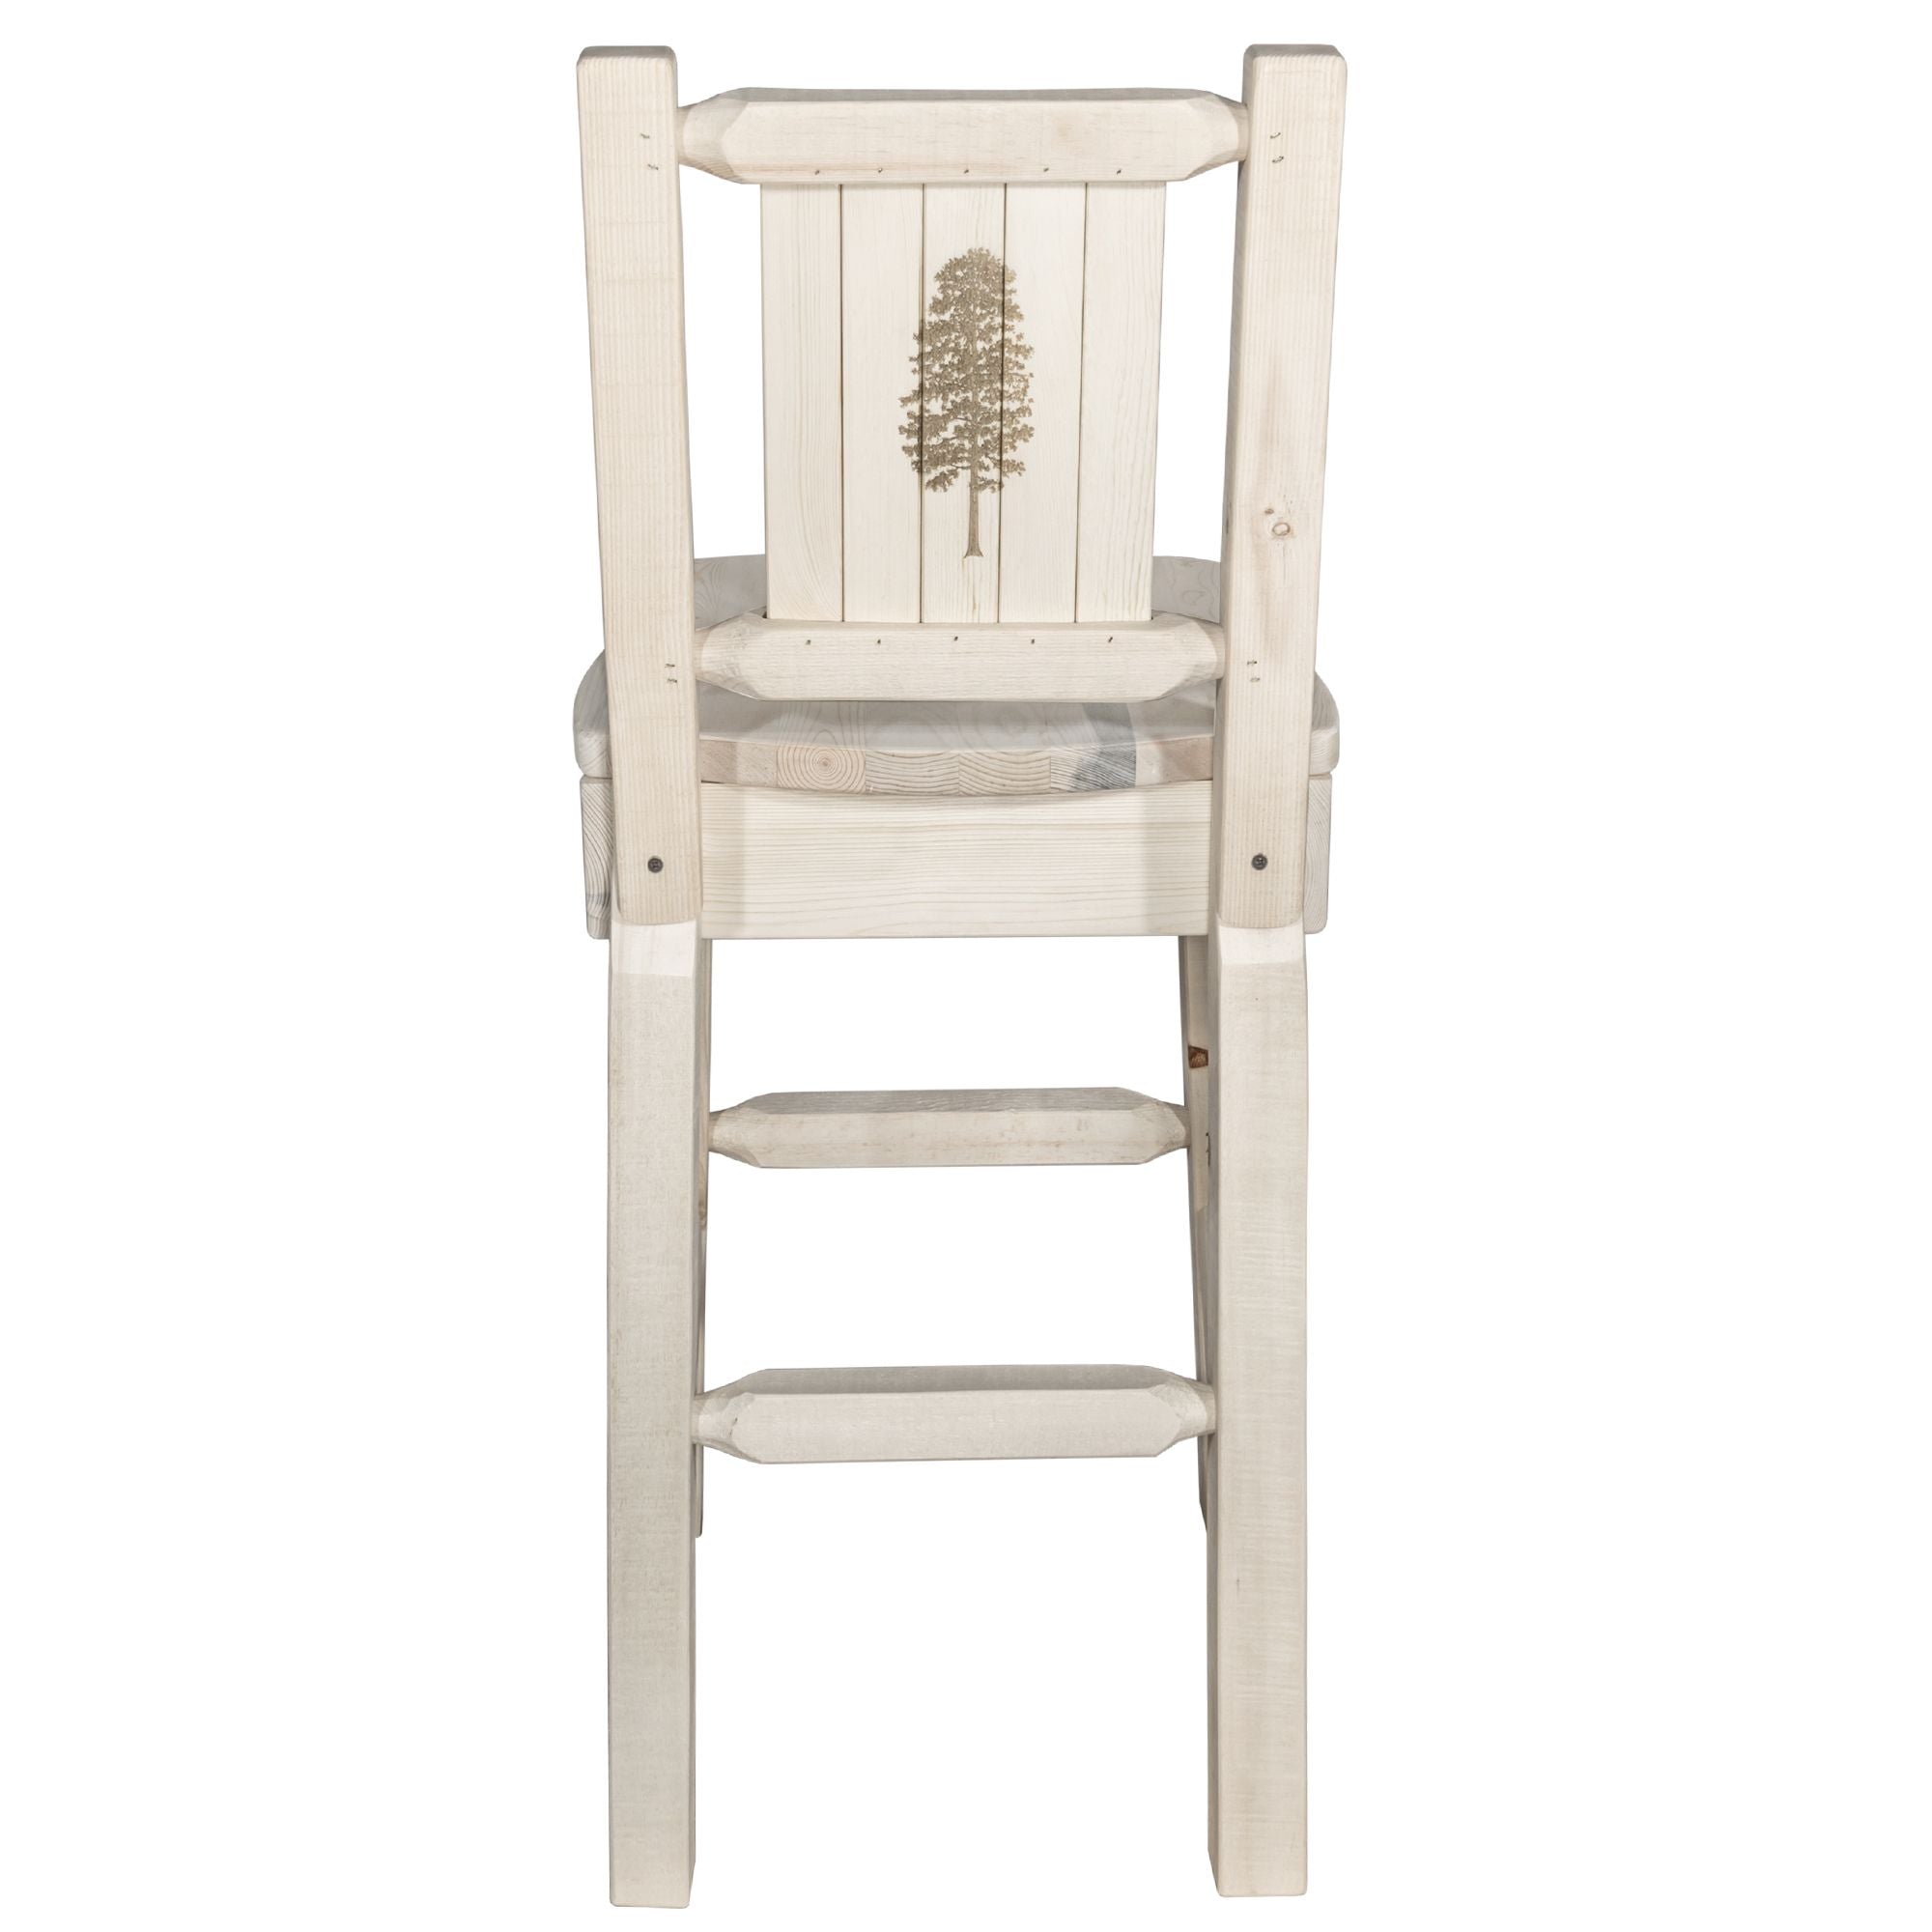 Montana Woodworks Homestead Collection Barstool w/ Back, w/ Laser Engraved Pine Tree Design